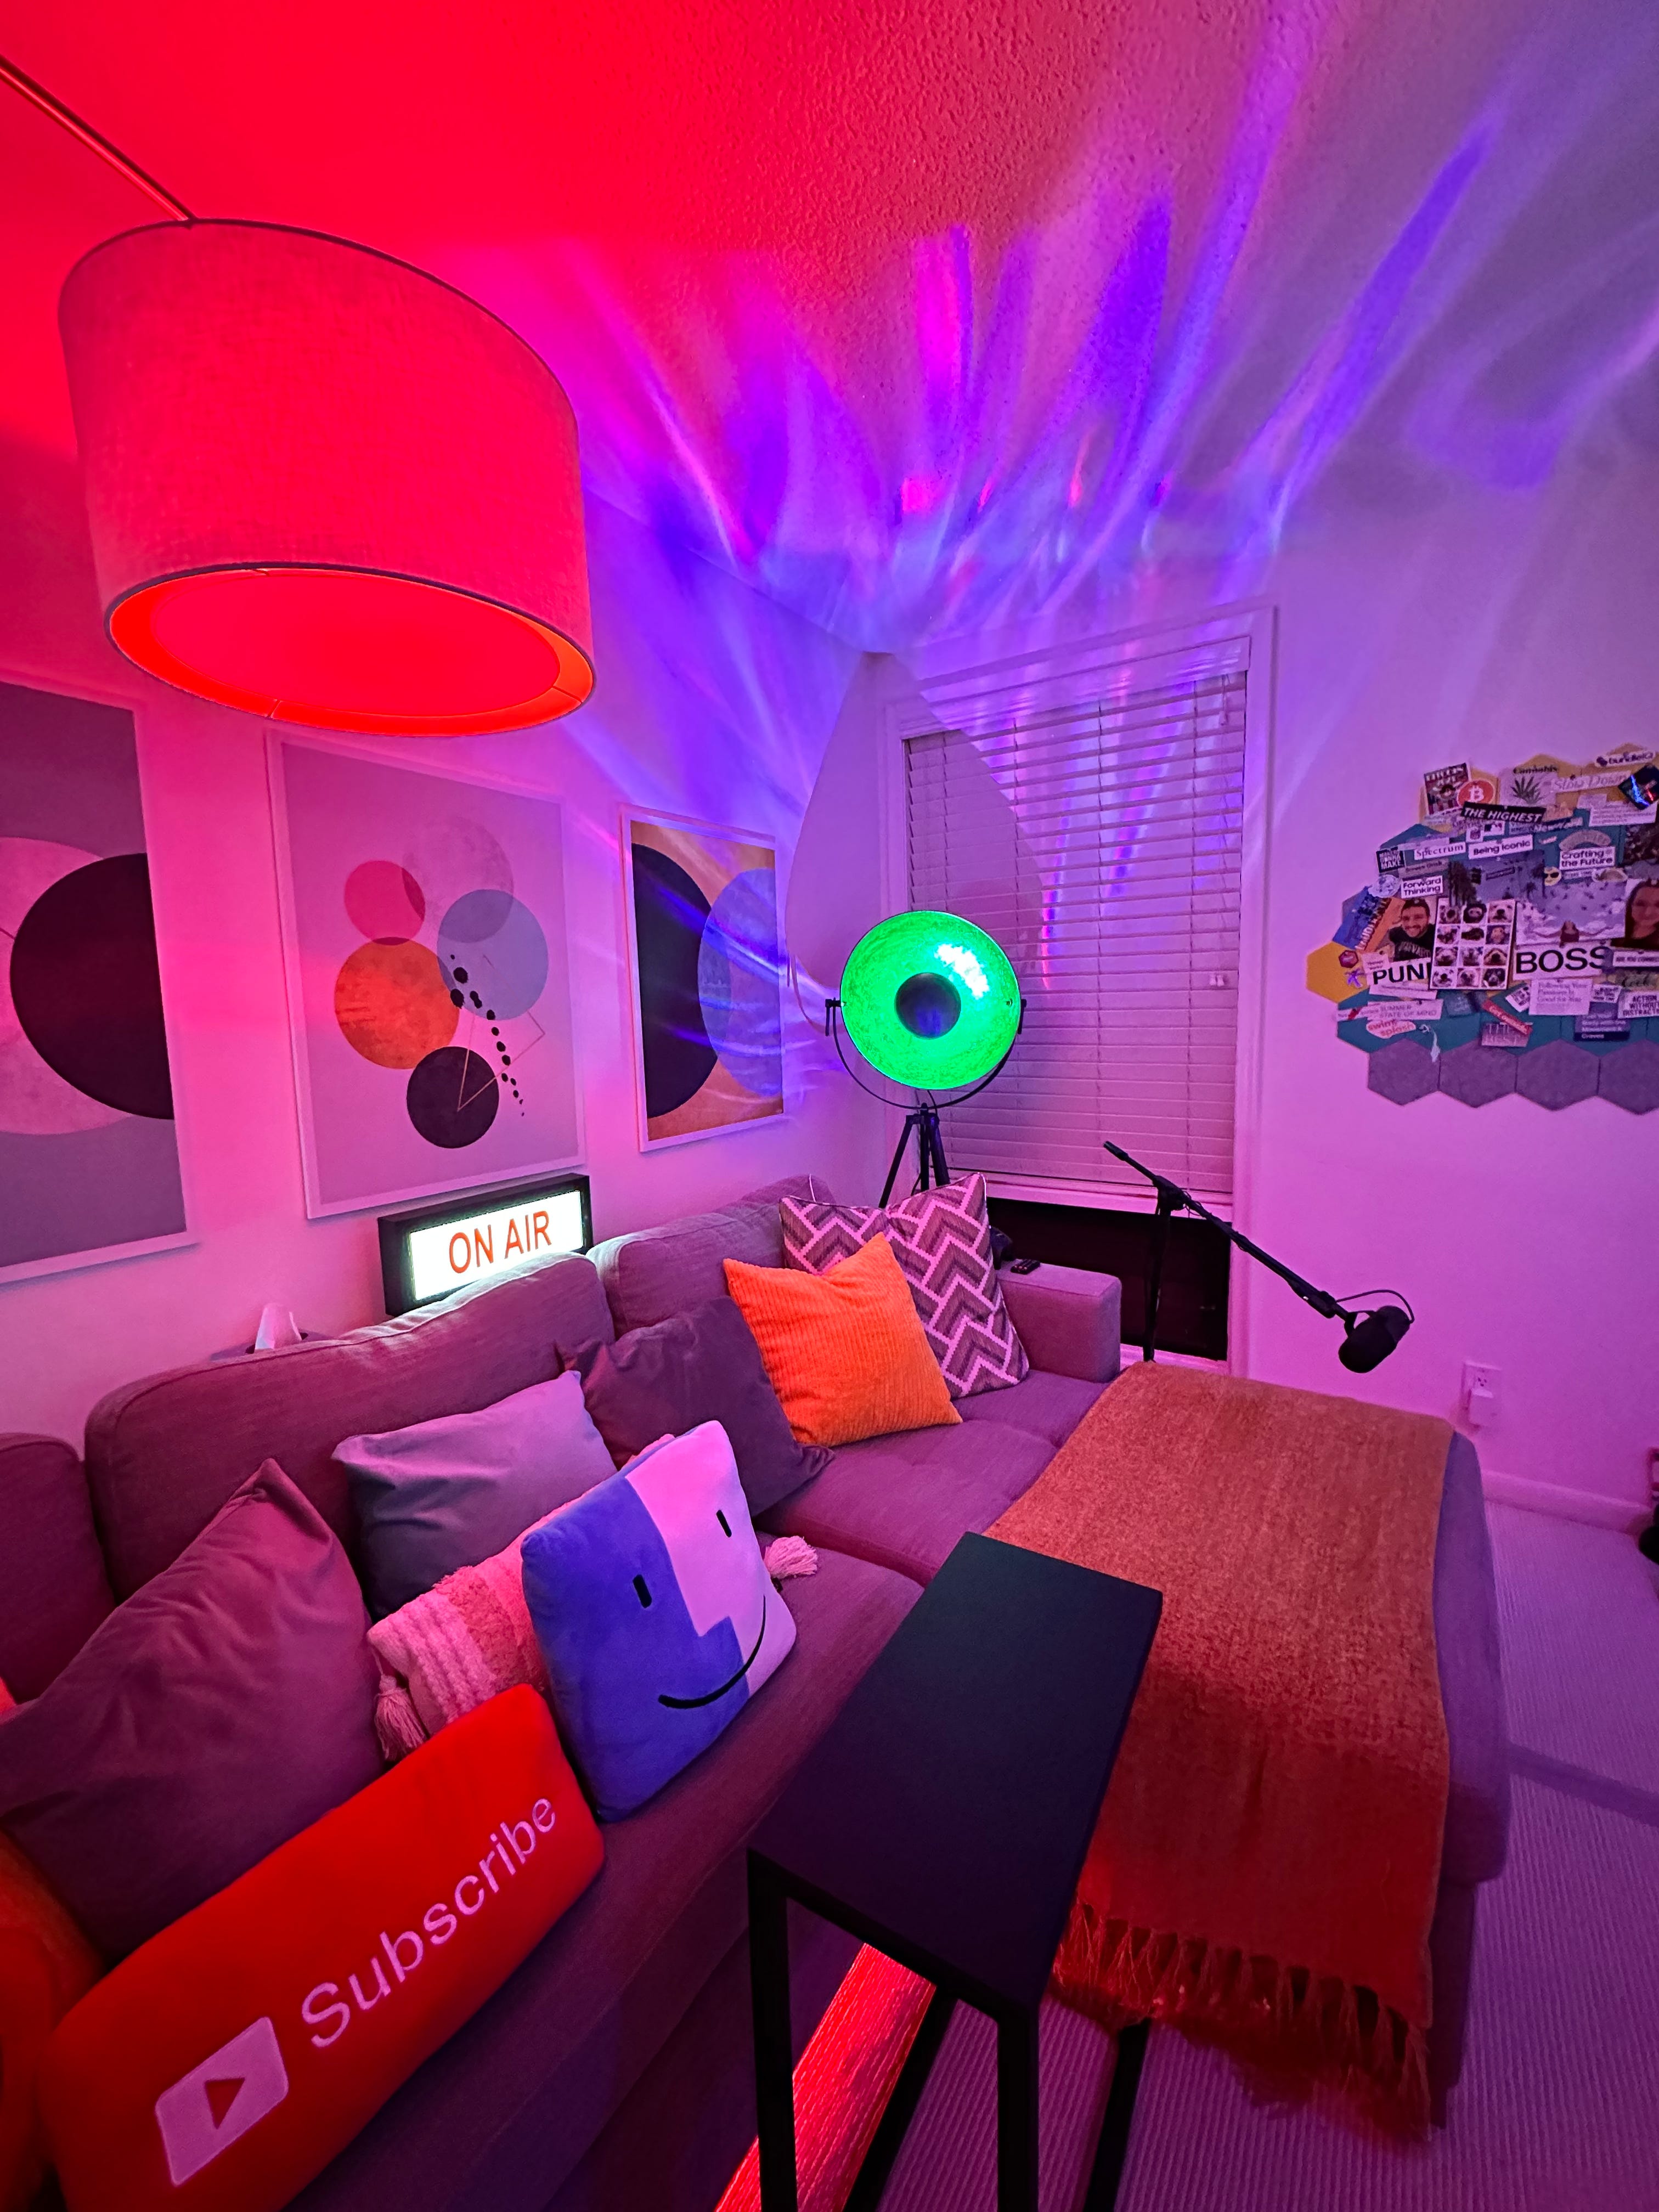 On creating sensory room experiences - by Jeff Weisbein